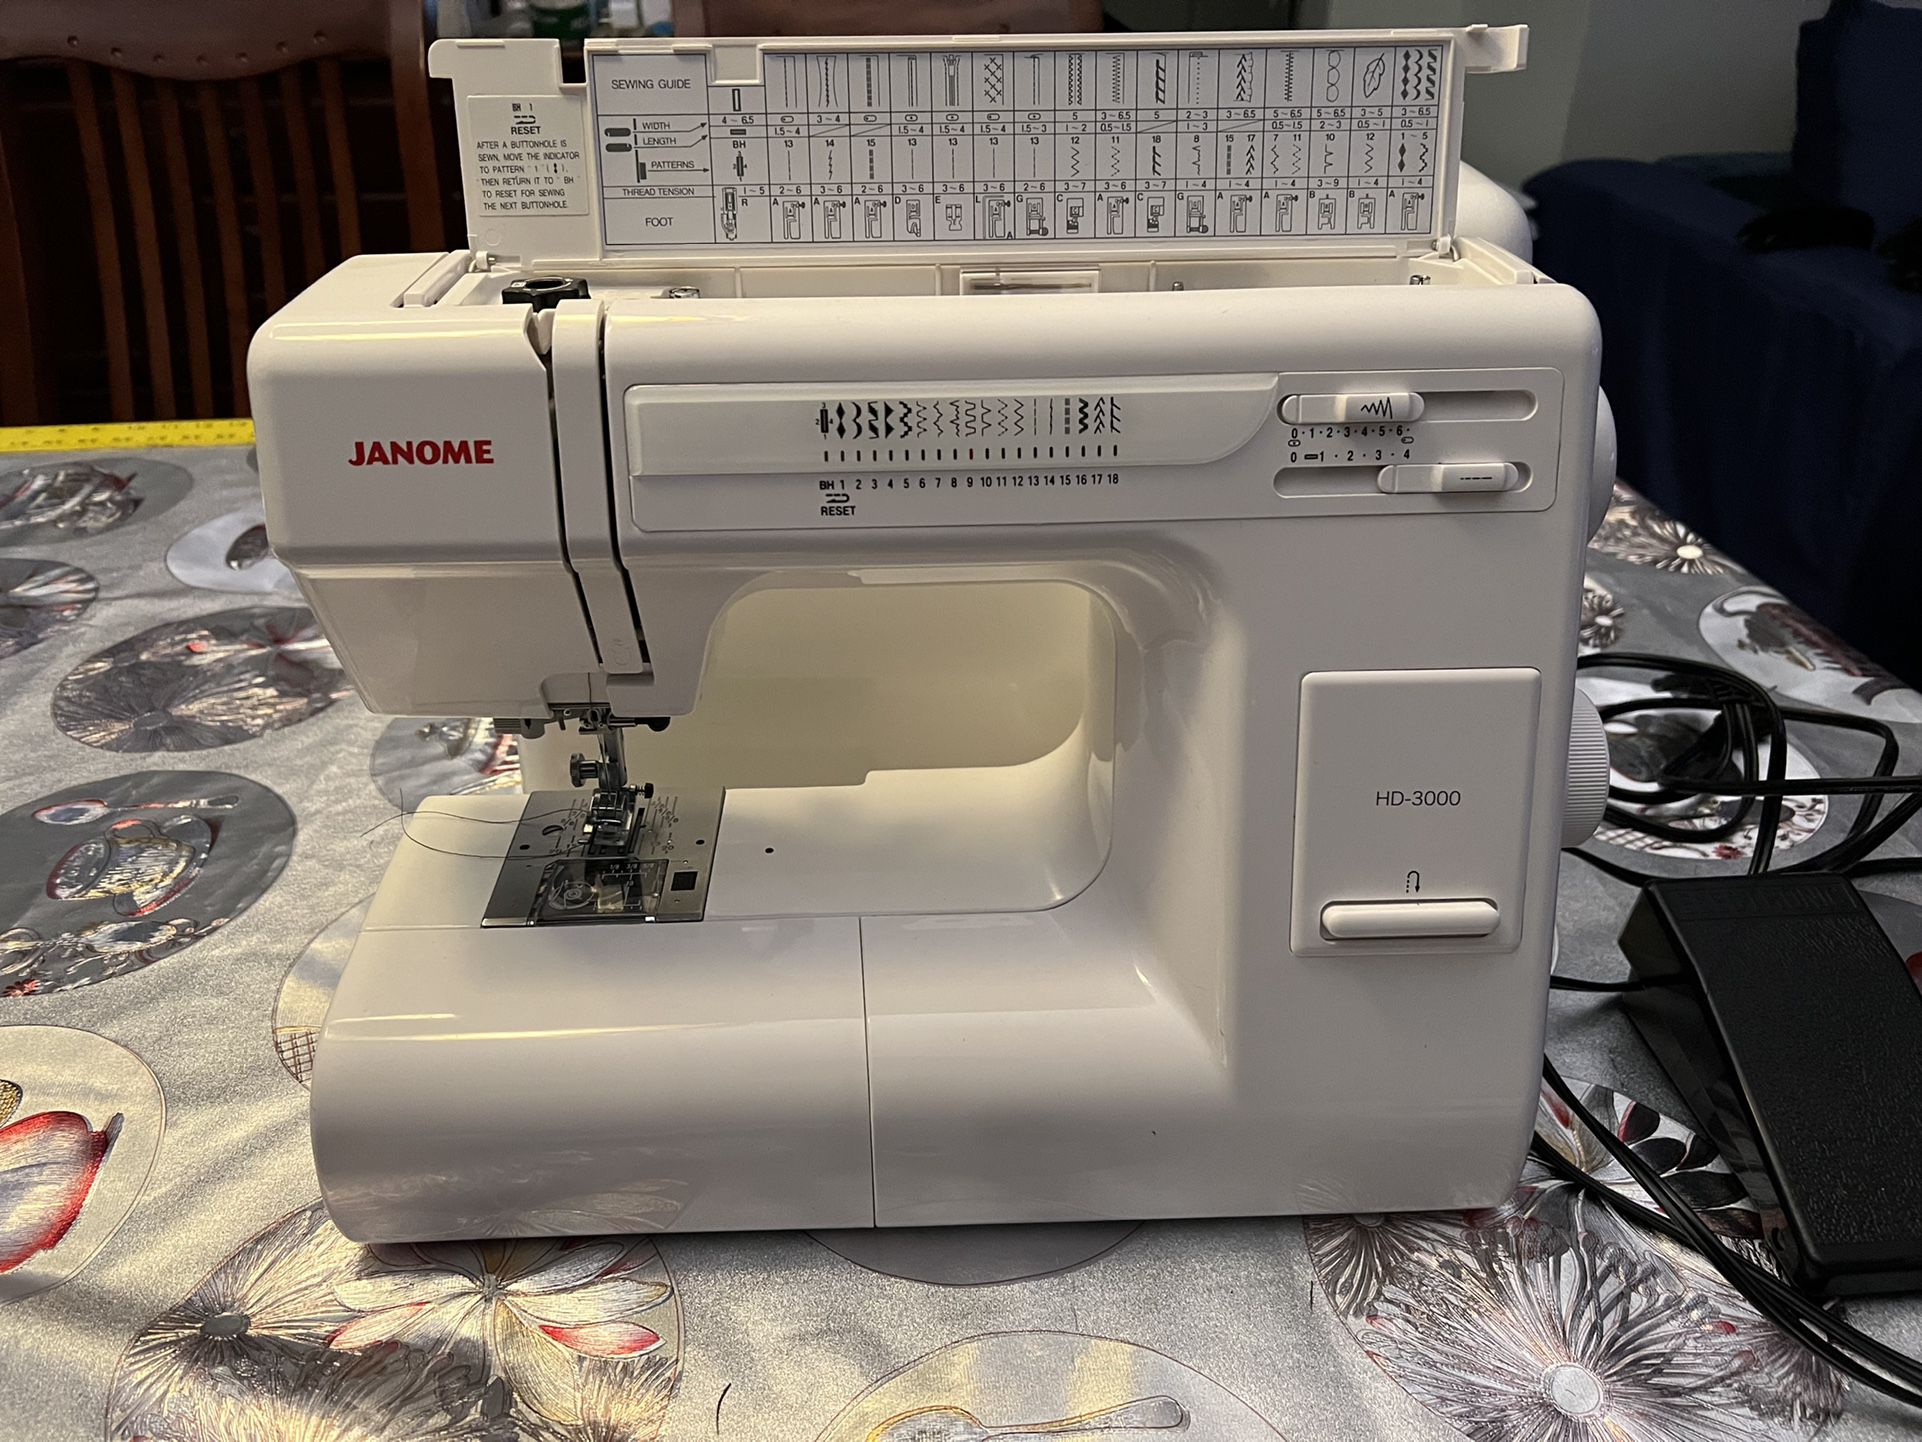 Janome HD-3000 Sewing machine for Sale in Seattle, WA - OfferUp